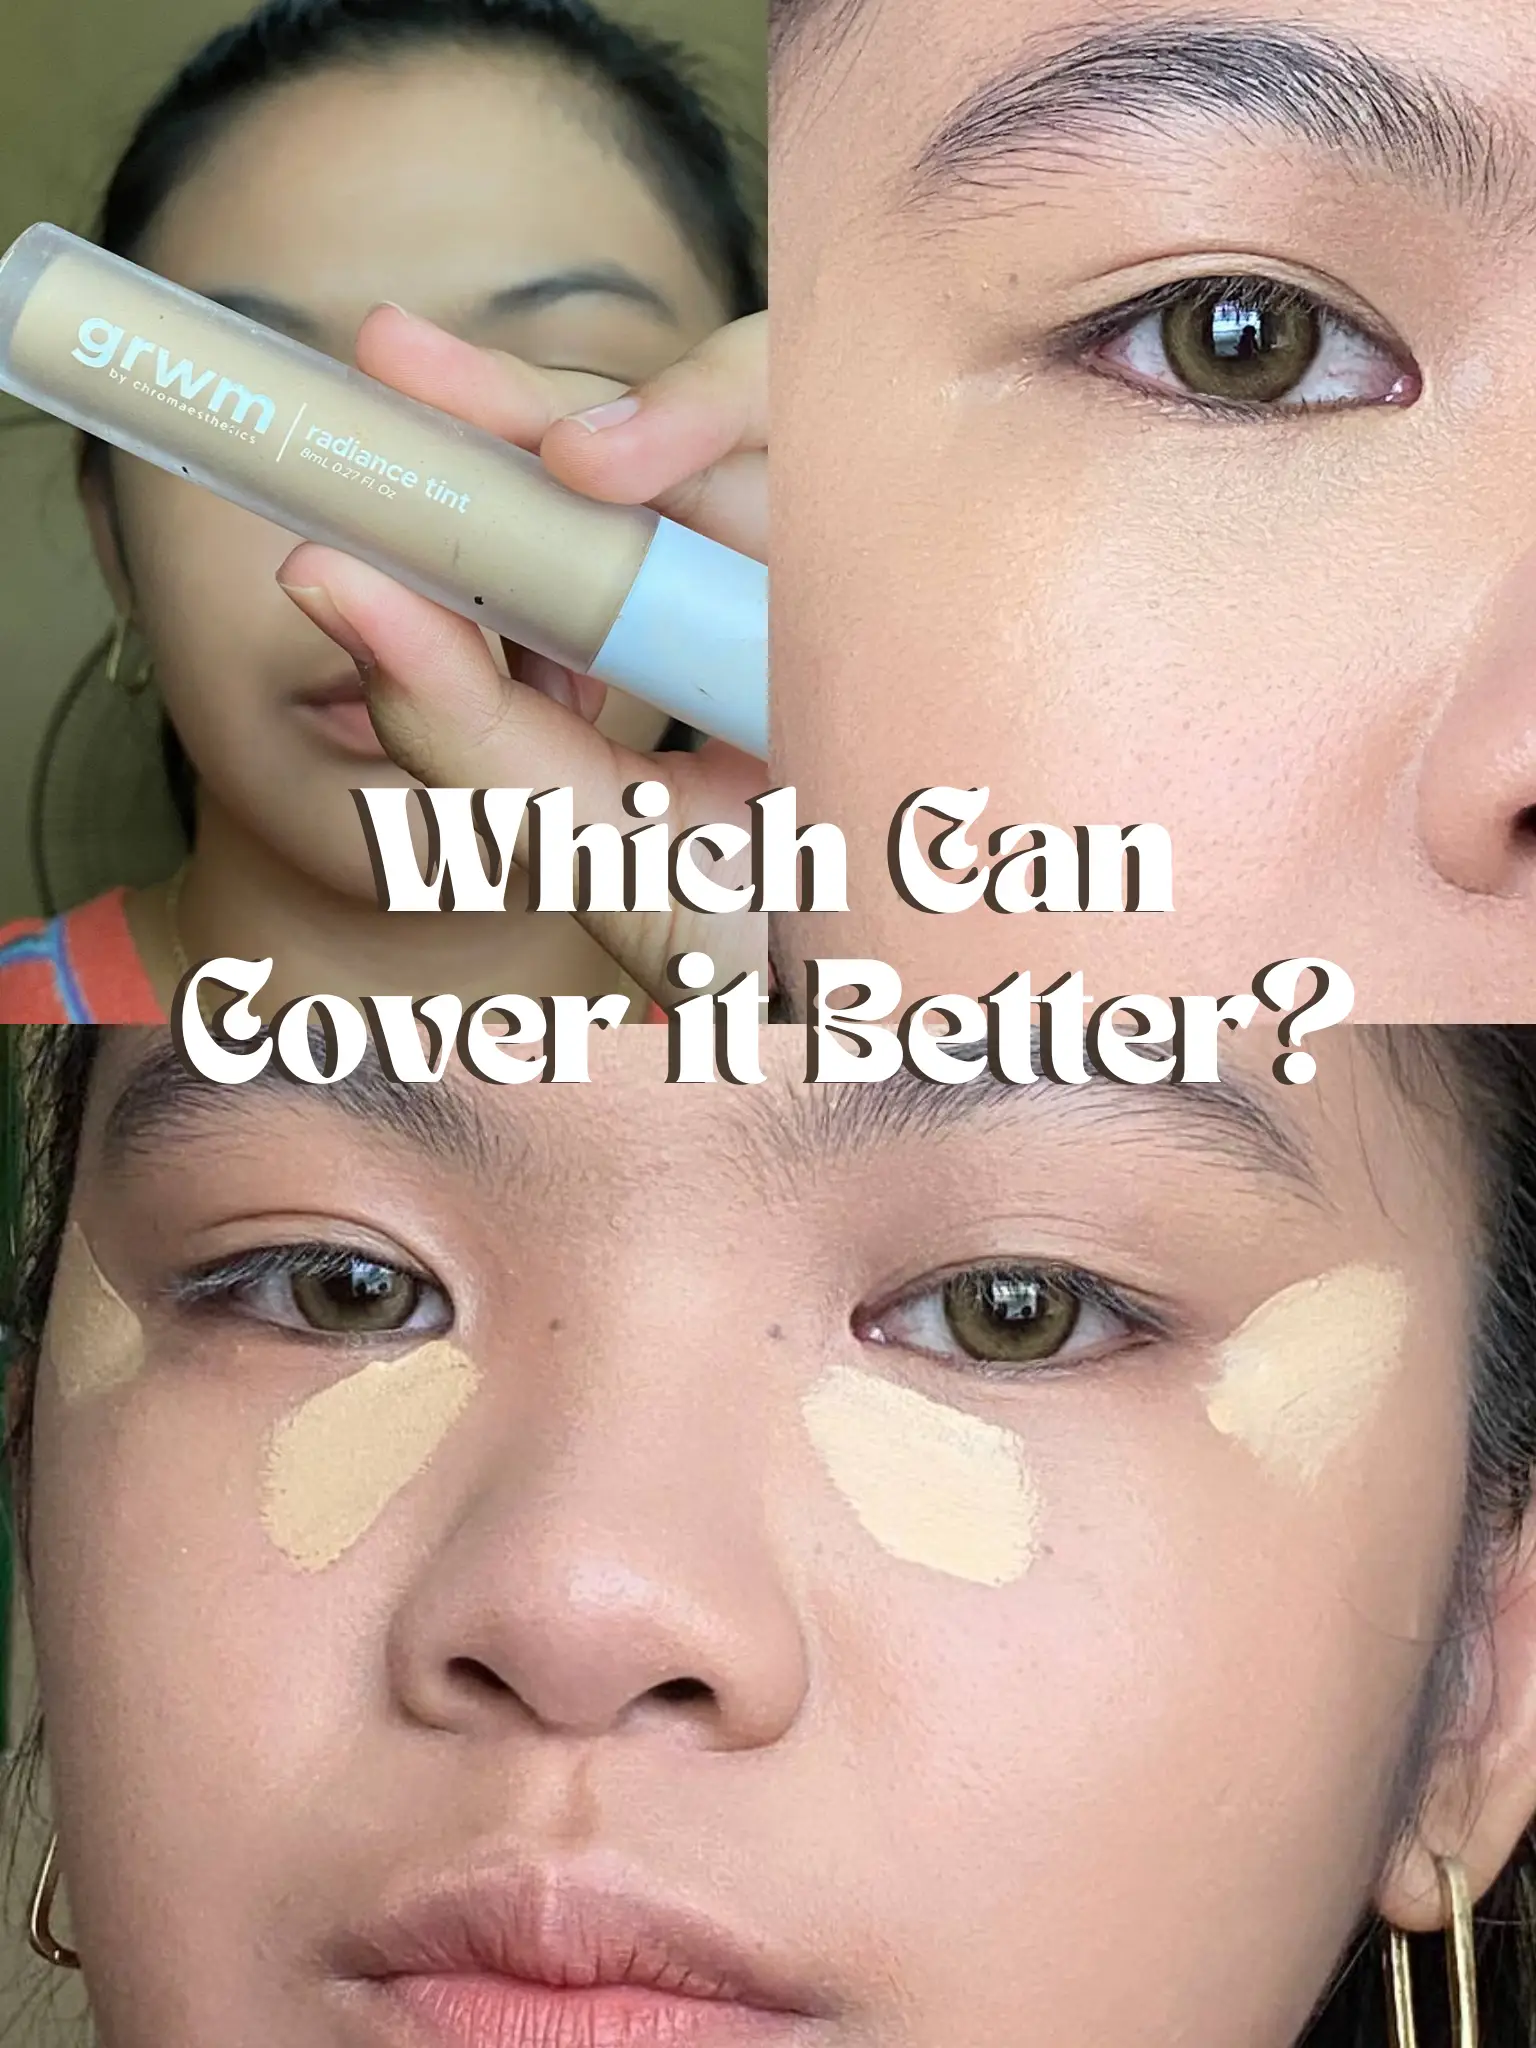 Cool-toned VS Warm-toned Contour: Which is Better?, Gallery posted by  venus ♡